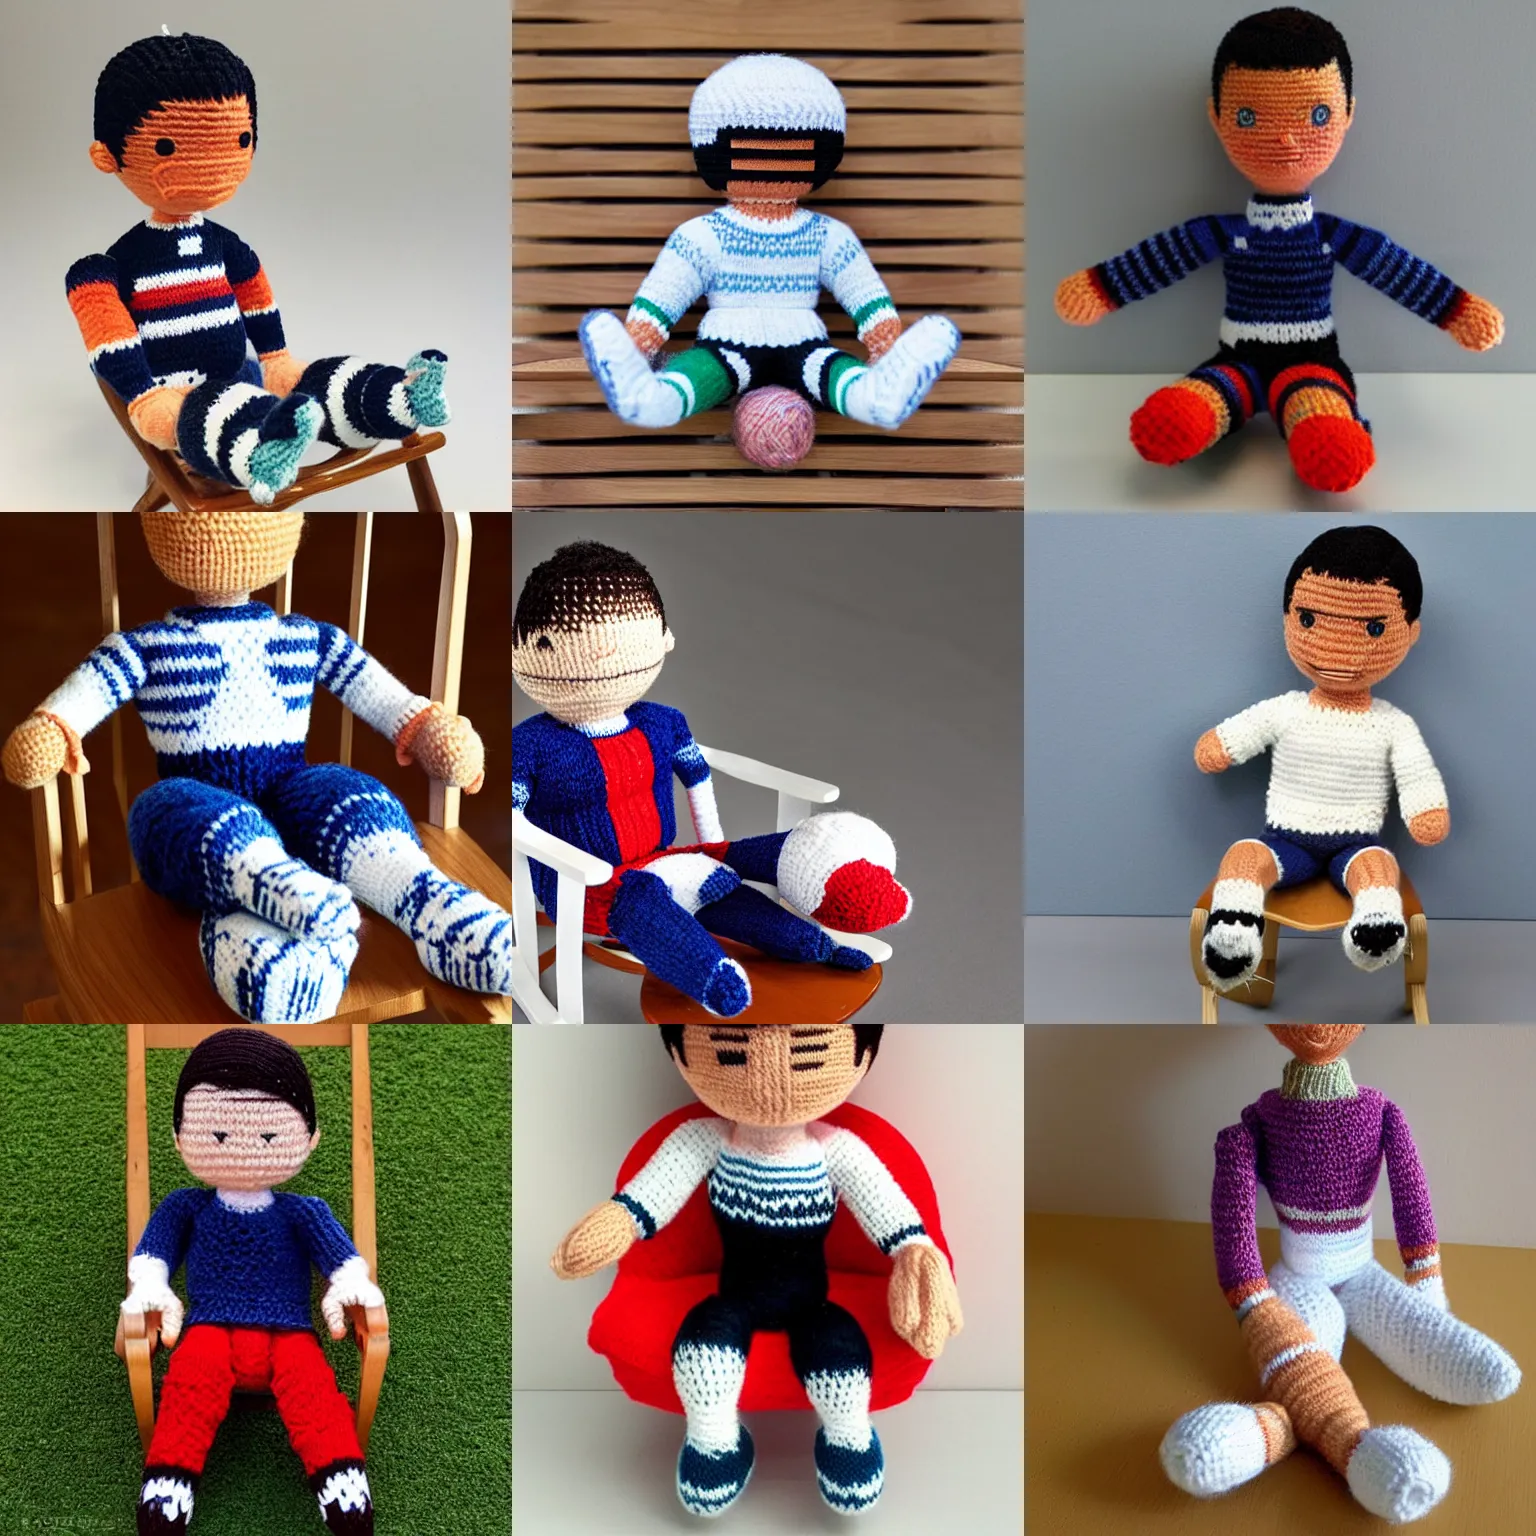 Prompt: Cristiano Ronaldo doll knitted from yarn, sitting in a rocking chair, realism, proportions